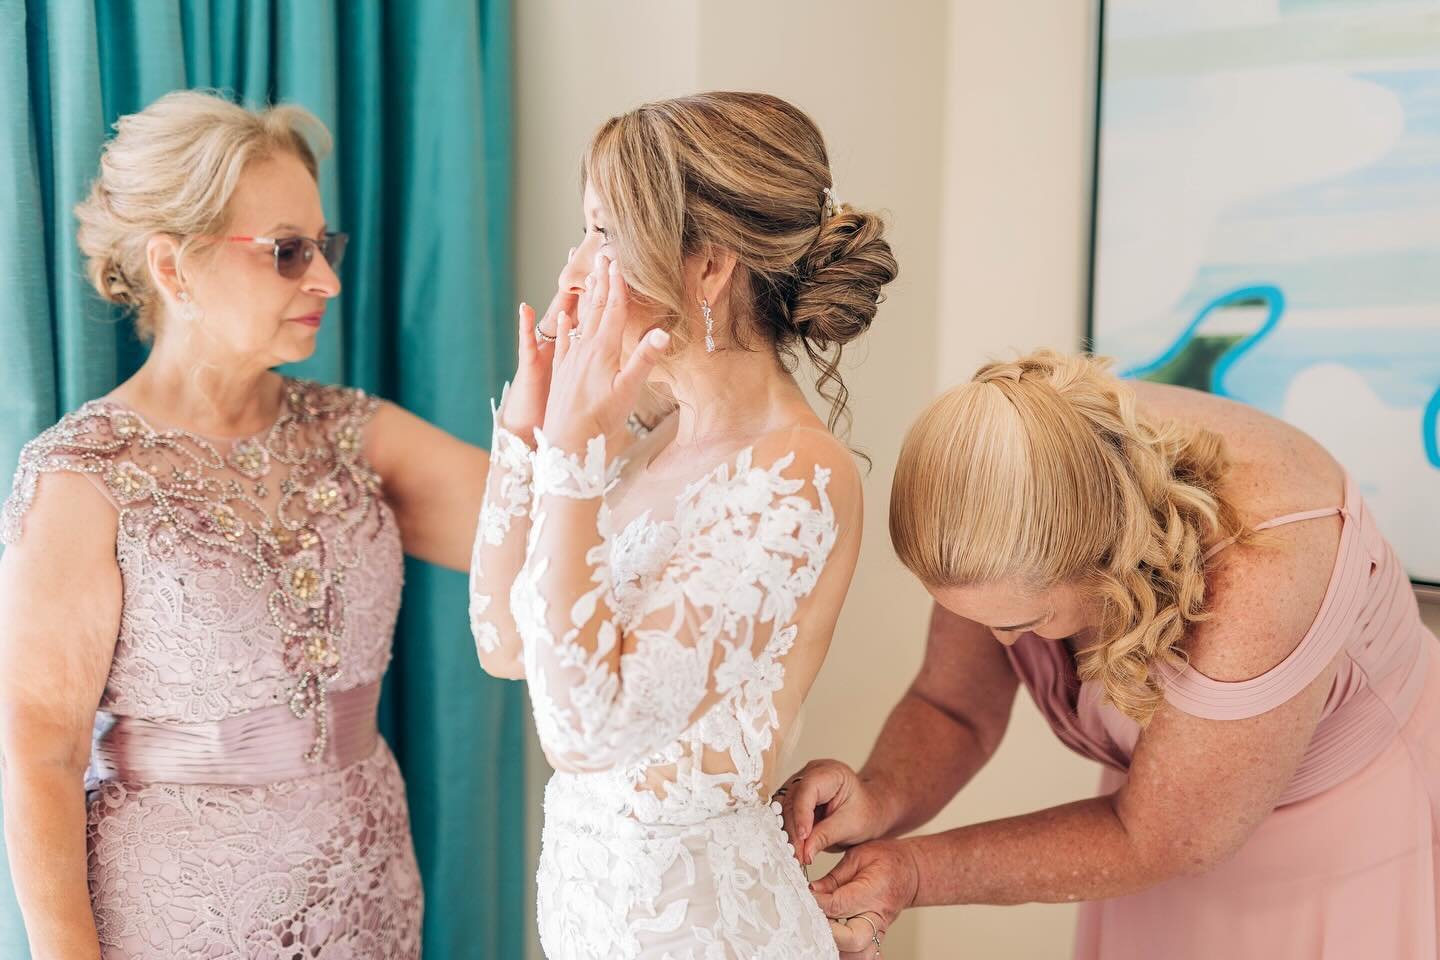 the moment when you realize you&rsquo;re about to get married! I feel like a lot of brides tell me that as soon as the photos start all of the sudden reality kicks in and the emotions start. For some it also happens once you see yourself in your dres